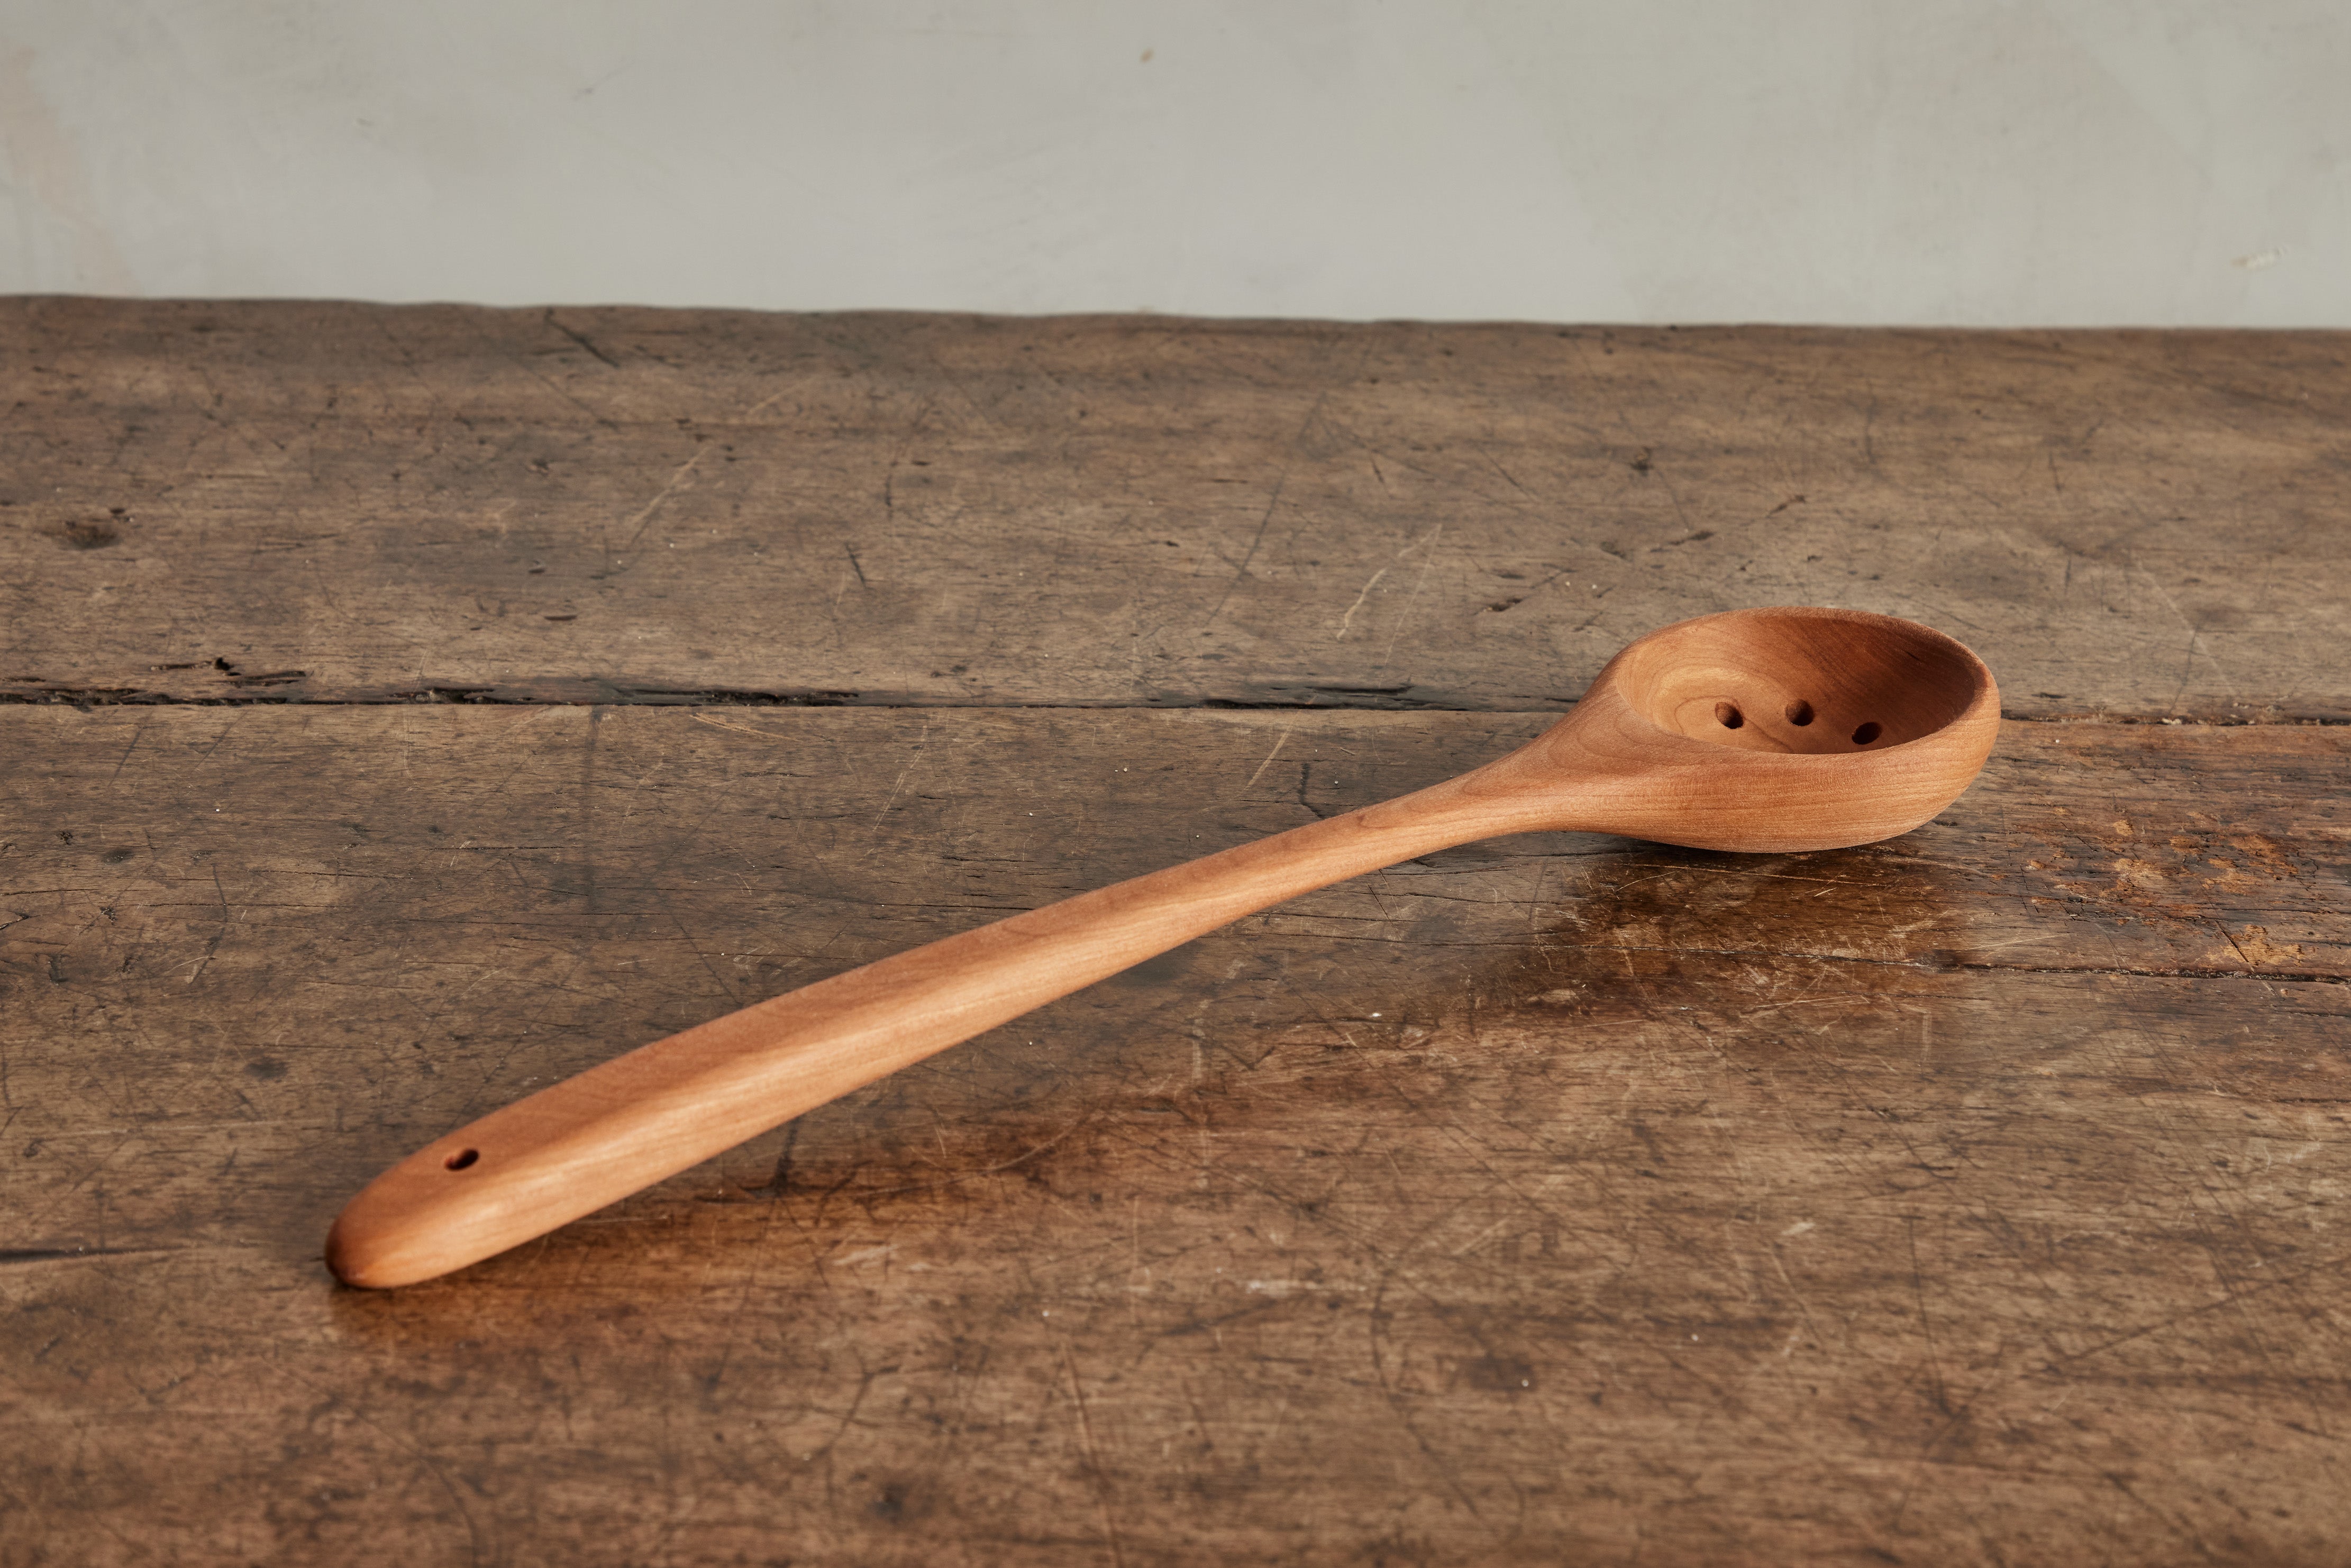 Long Handled Measuring Spoons wooden, Cherry Wood 